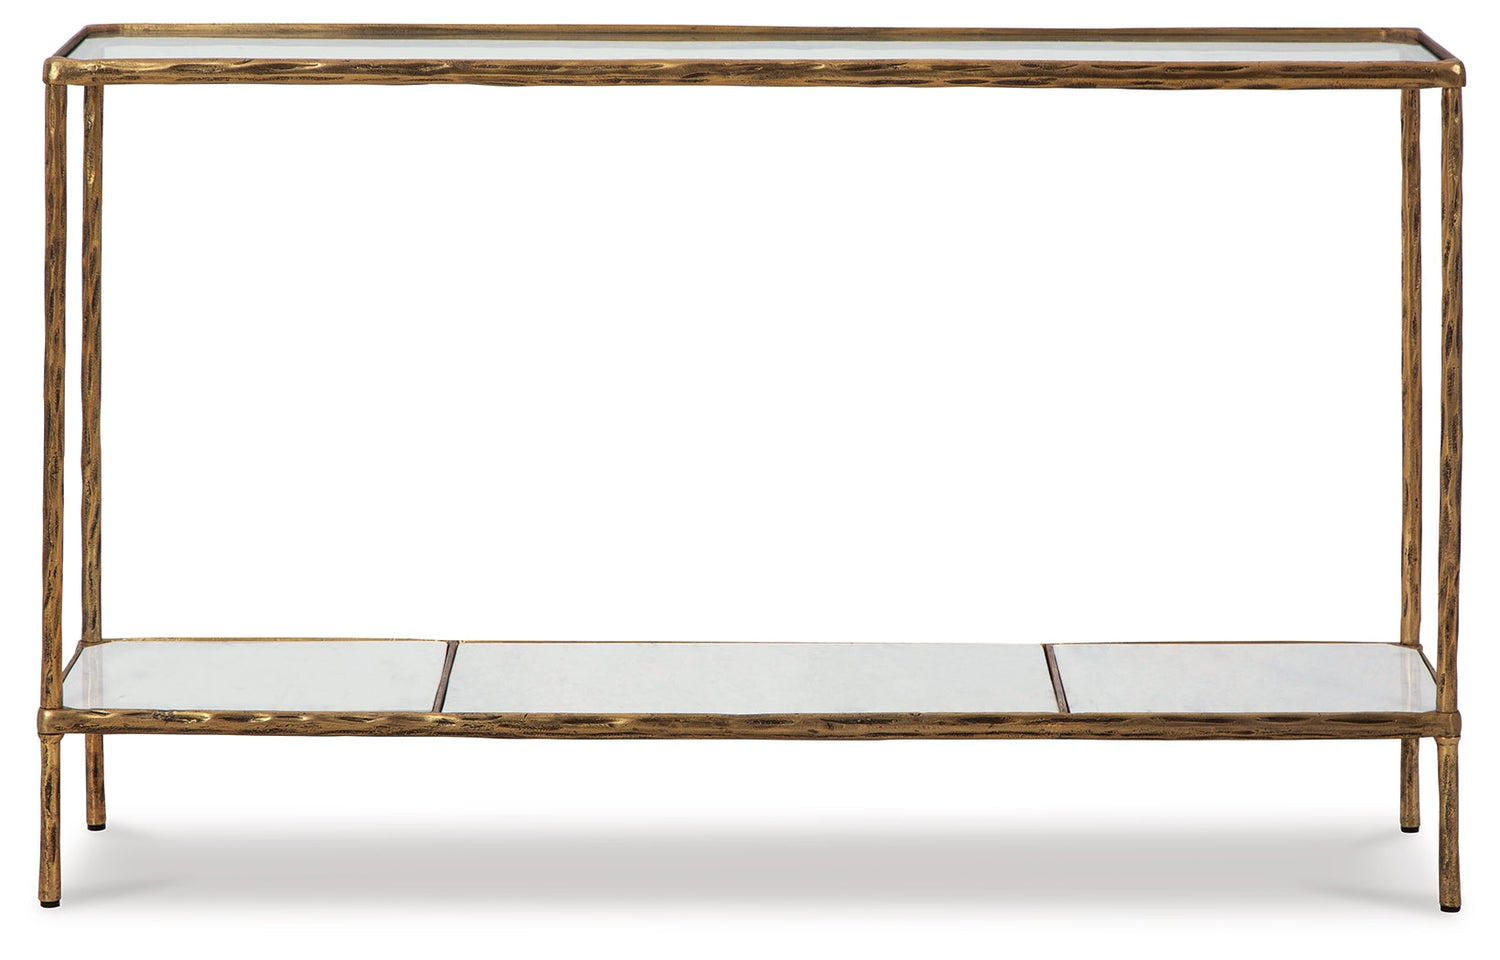 Ryandale Antique Brass Finish Console Sofa Table - A4000443 - Bien Home Furniture &amp; Electronics